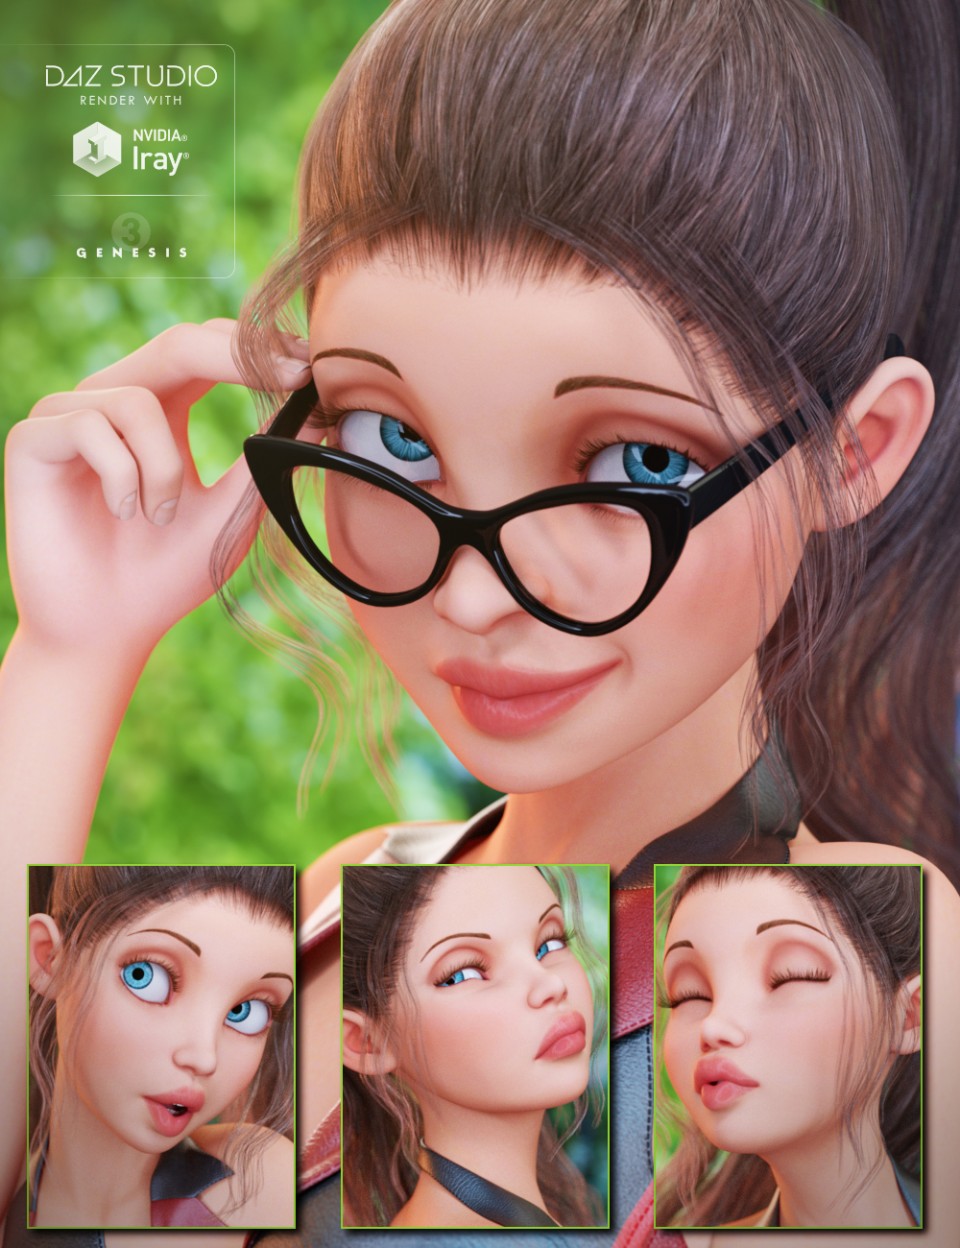 Capsces Tooned Expressions for The Girl 7_DAZ3D下载站